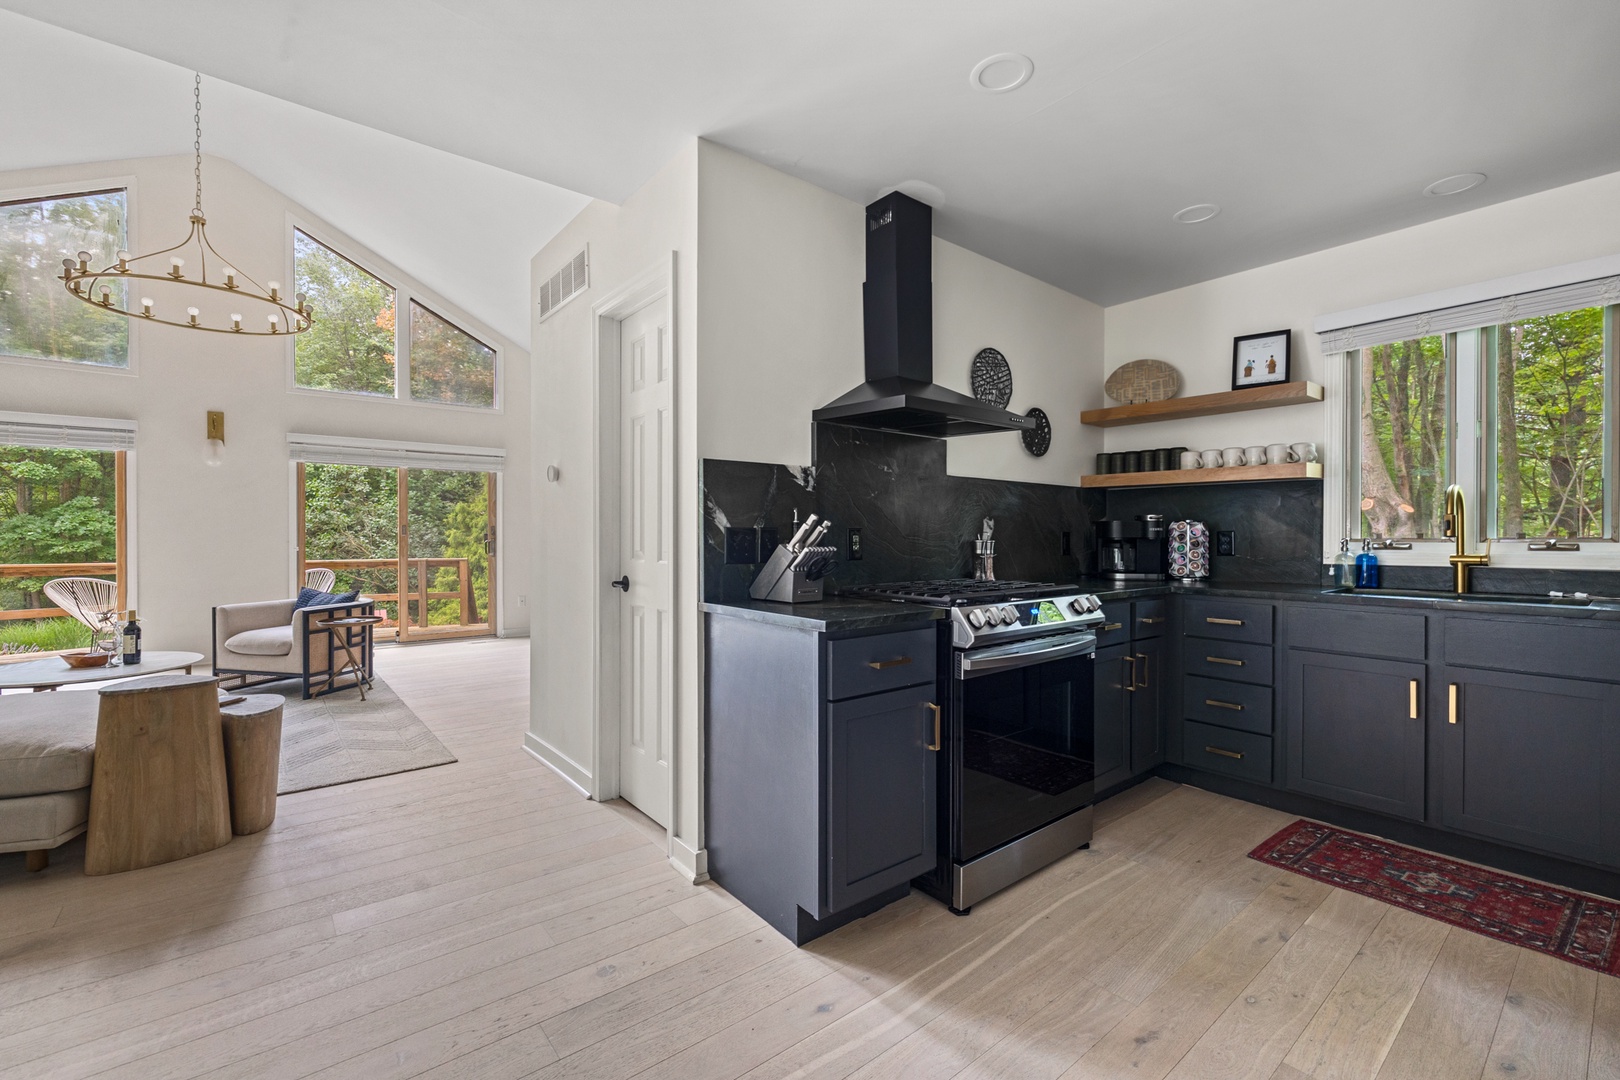 The kitchen is highlighted by an impressive gas stove.